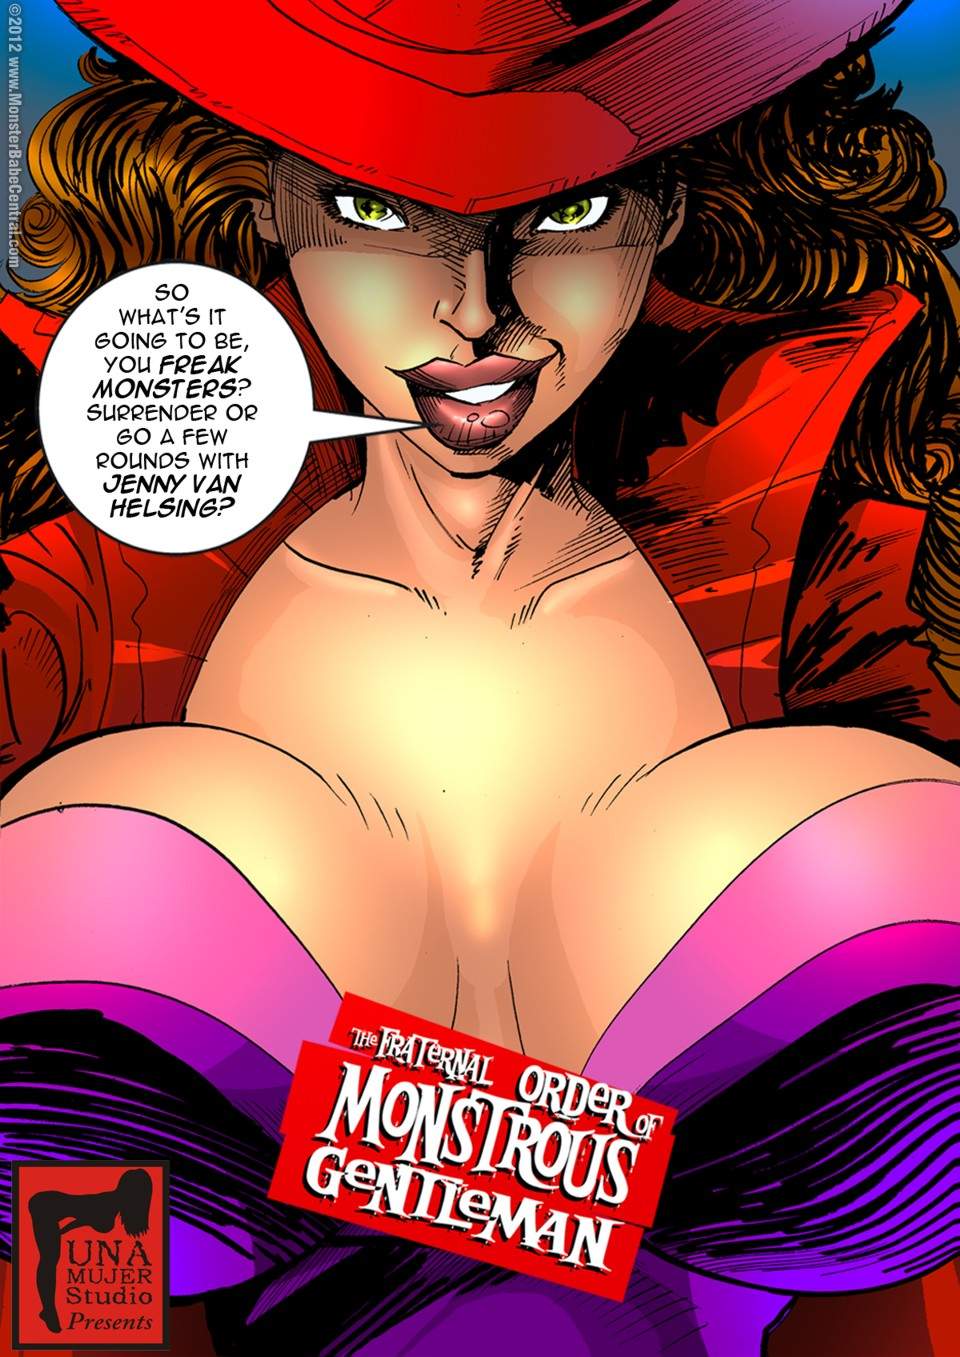 SureFap xxx porno Crossover - [MonsterBabeCentral] - The Fraternal Order of Monstrous Gentlemen! - Issue 7 -  First Encounter With Monsters